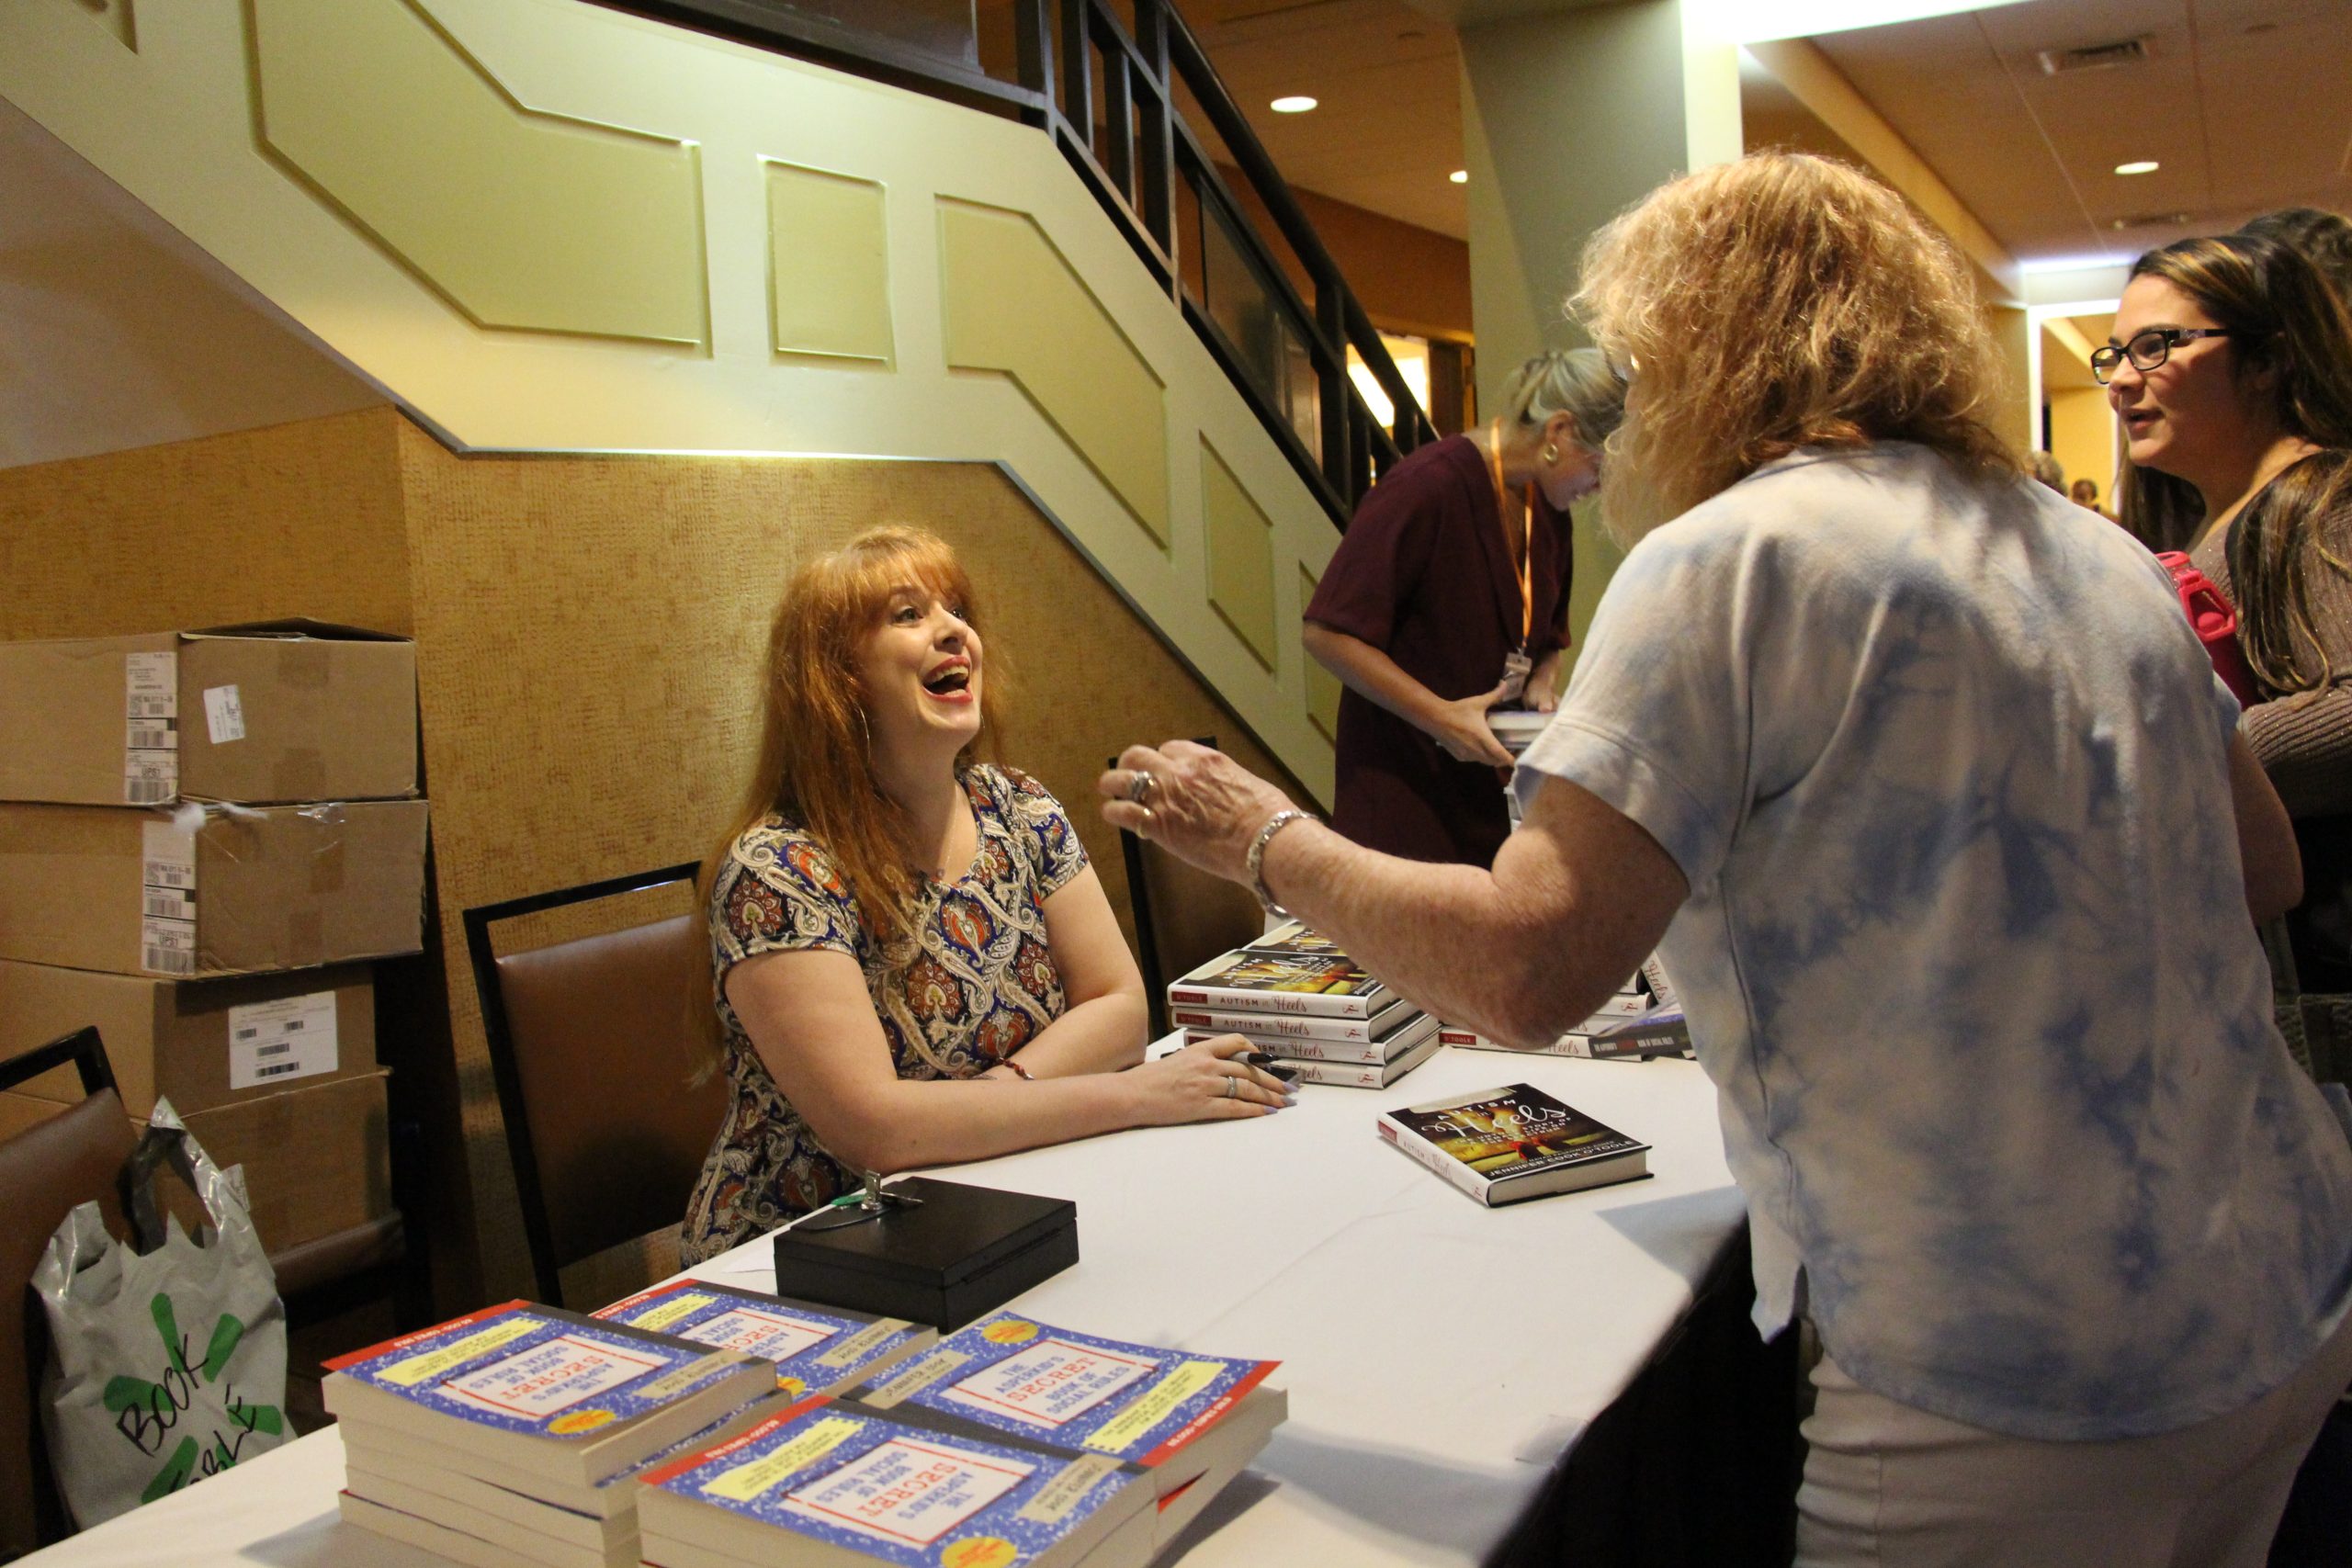 Keynote speaker Jennifer Cook signs copies of her book at the Autism Conference.